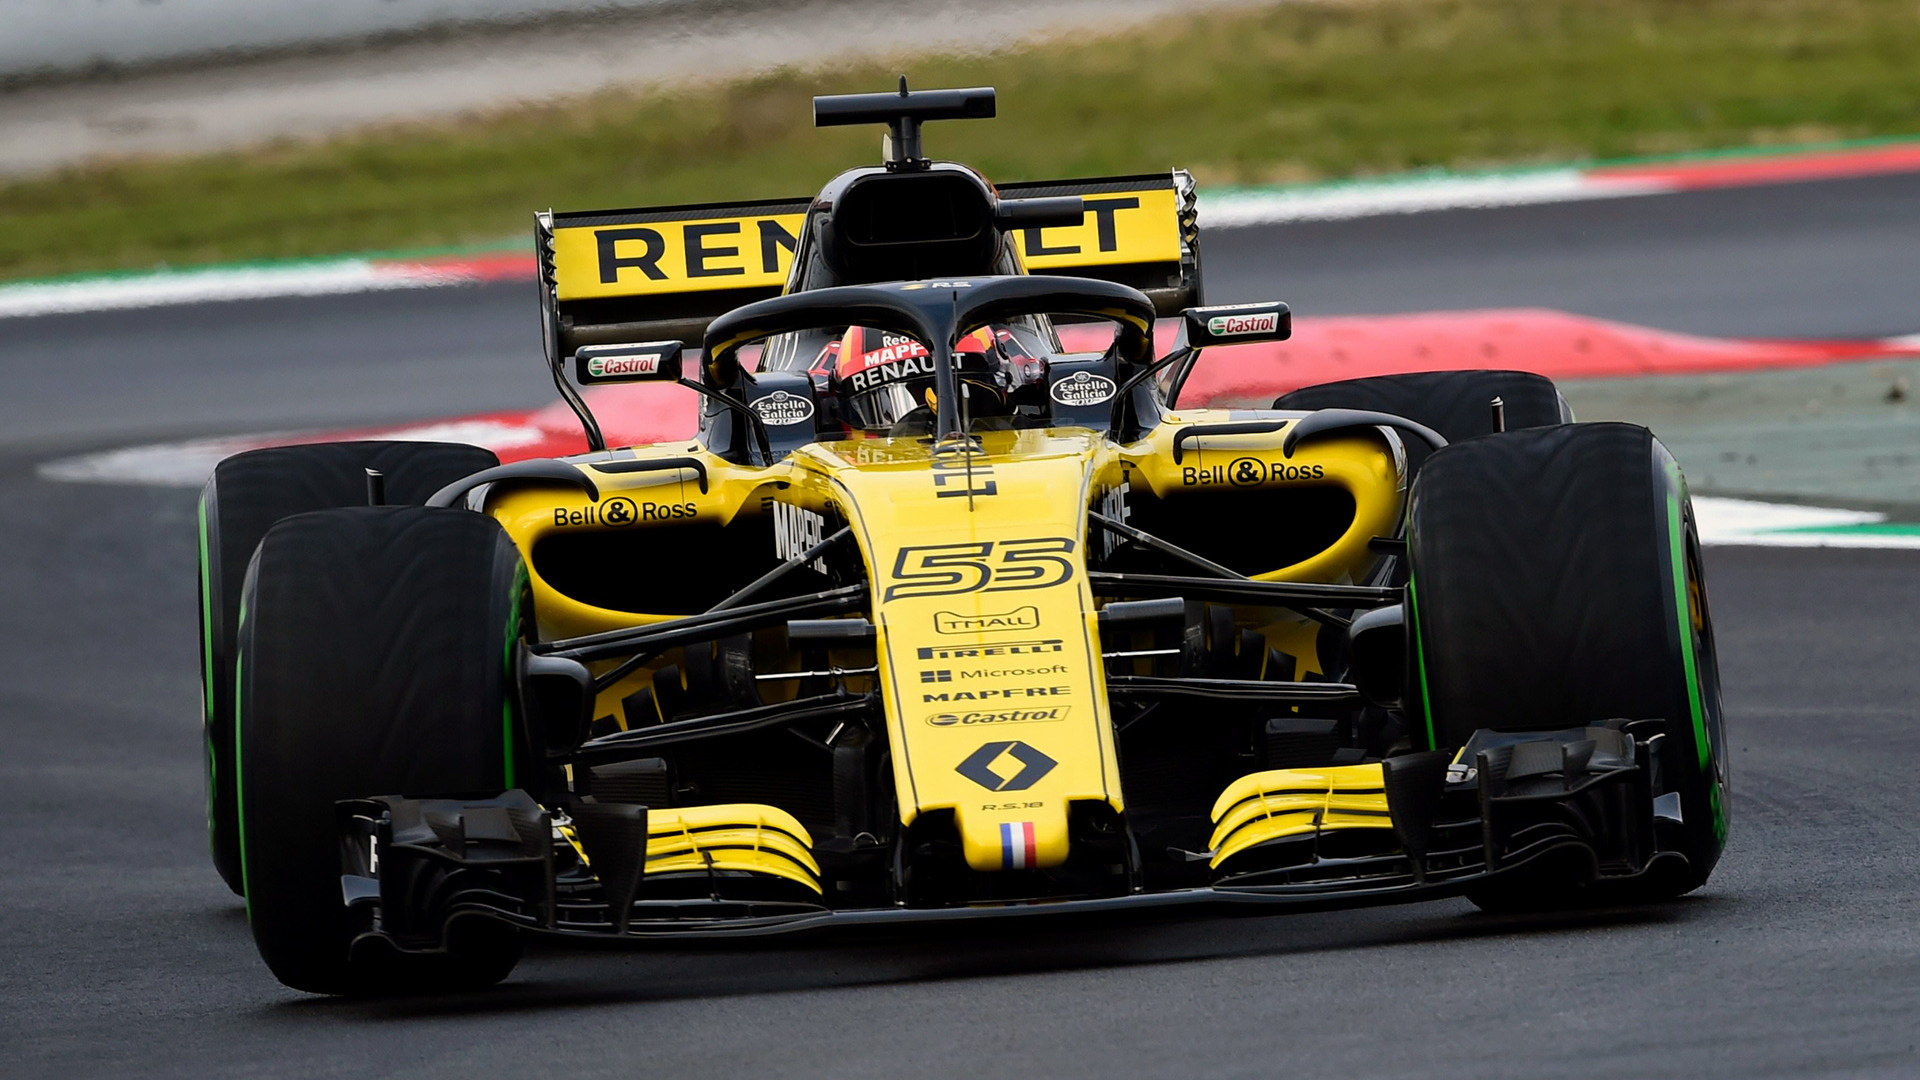 Renault R.S.18 Wallpapers